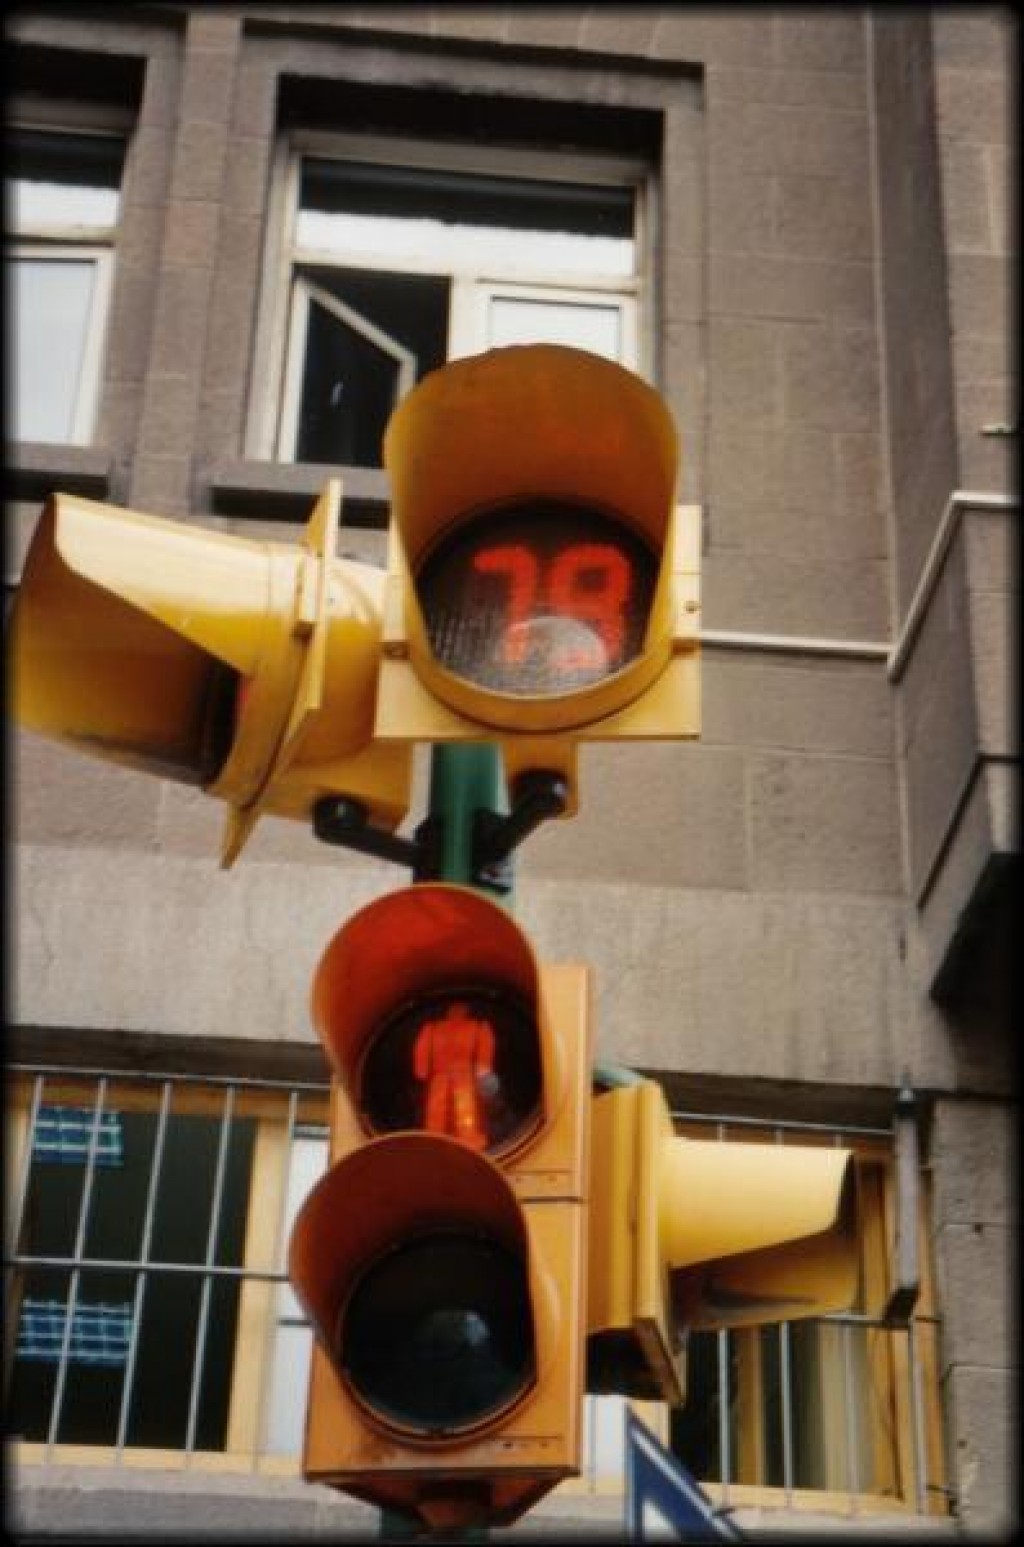 The traffic lights have timers on them to let pedestrians know how long they have to cross.  And people couldn't stop laughing at us for taking a photo of a traffic light.